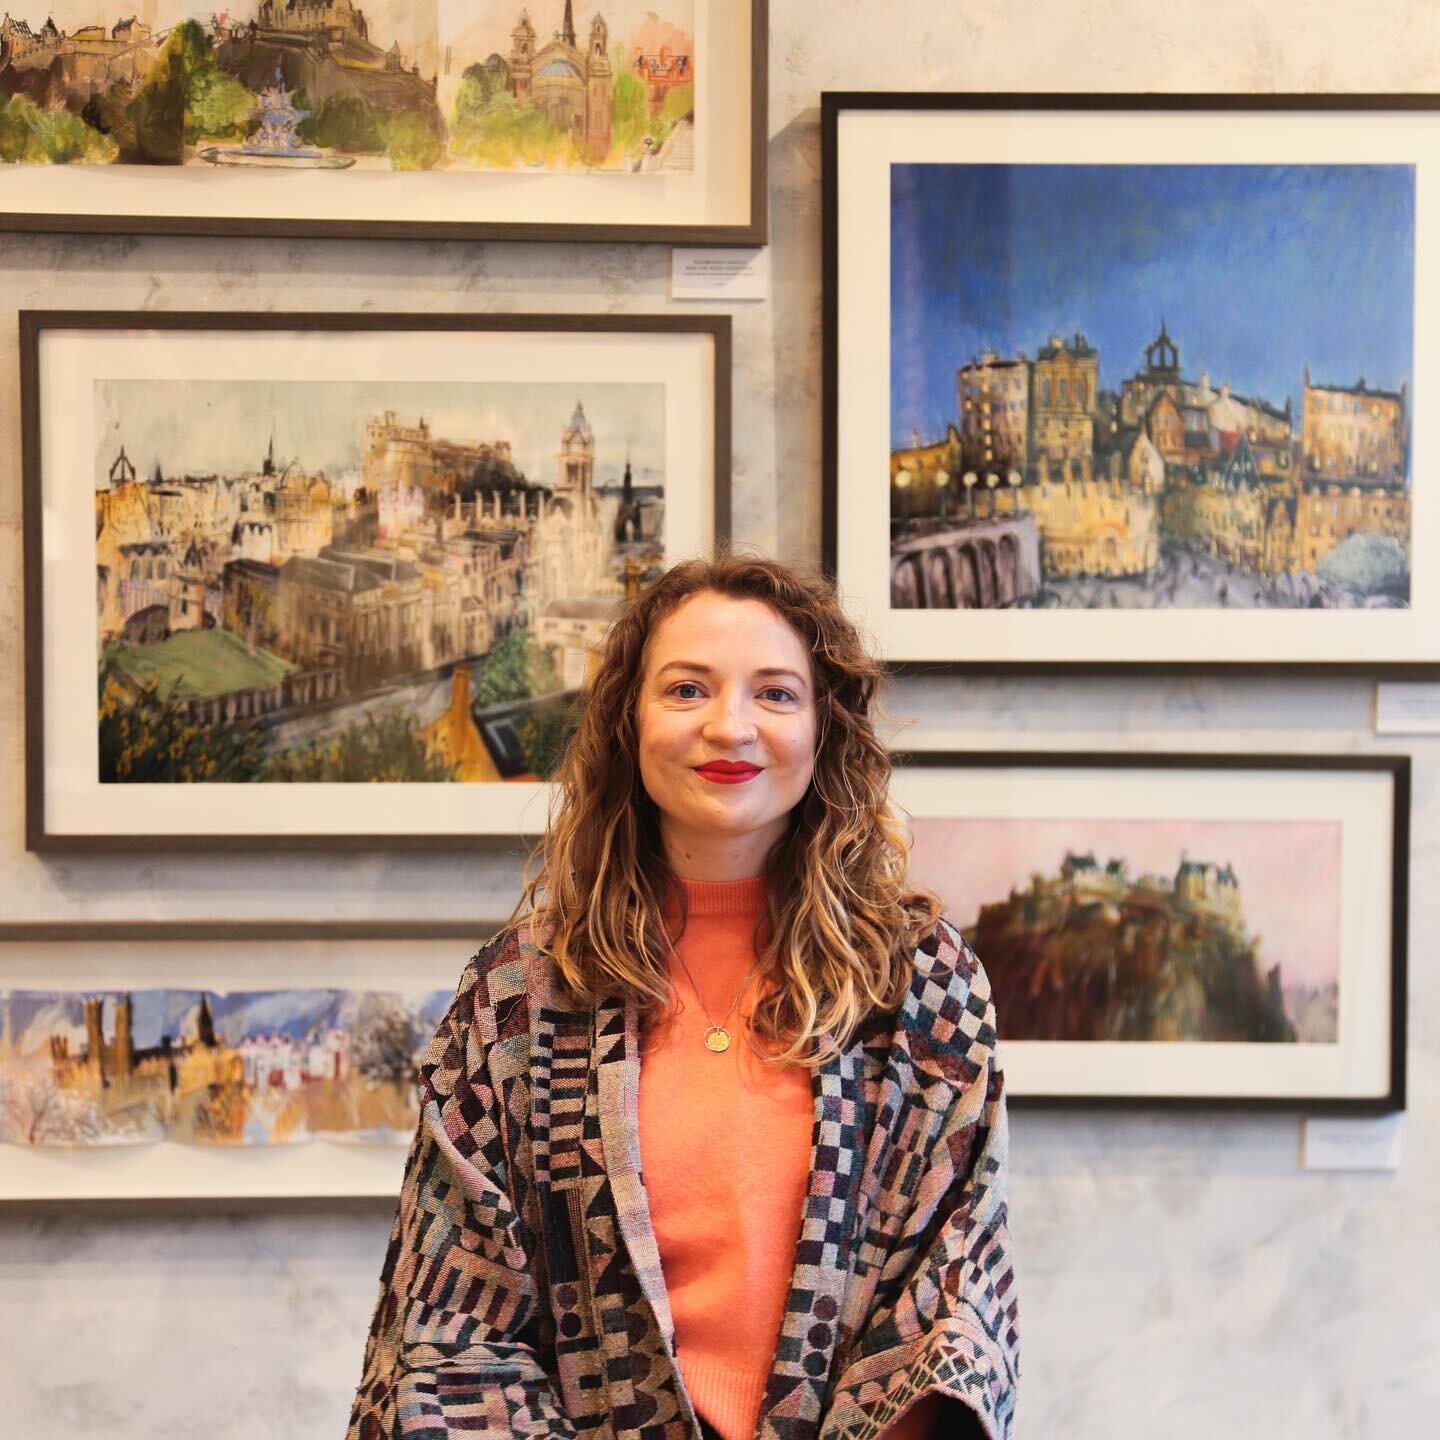 A great big heartfelt thank you to everyone who came along to my exhibition opening last night 🧡
⠀⠀⠀⠀⠀⠀⠀⠀⠀
I&rsquo;ll be very busy over the next few weeks painting new pieces to replace the half that have now sold. Let me know what you think if you 